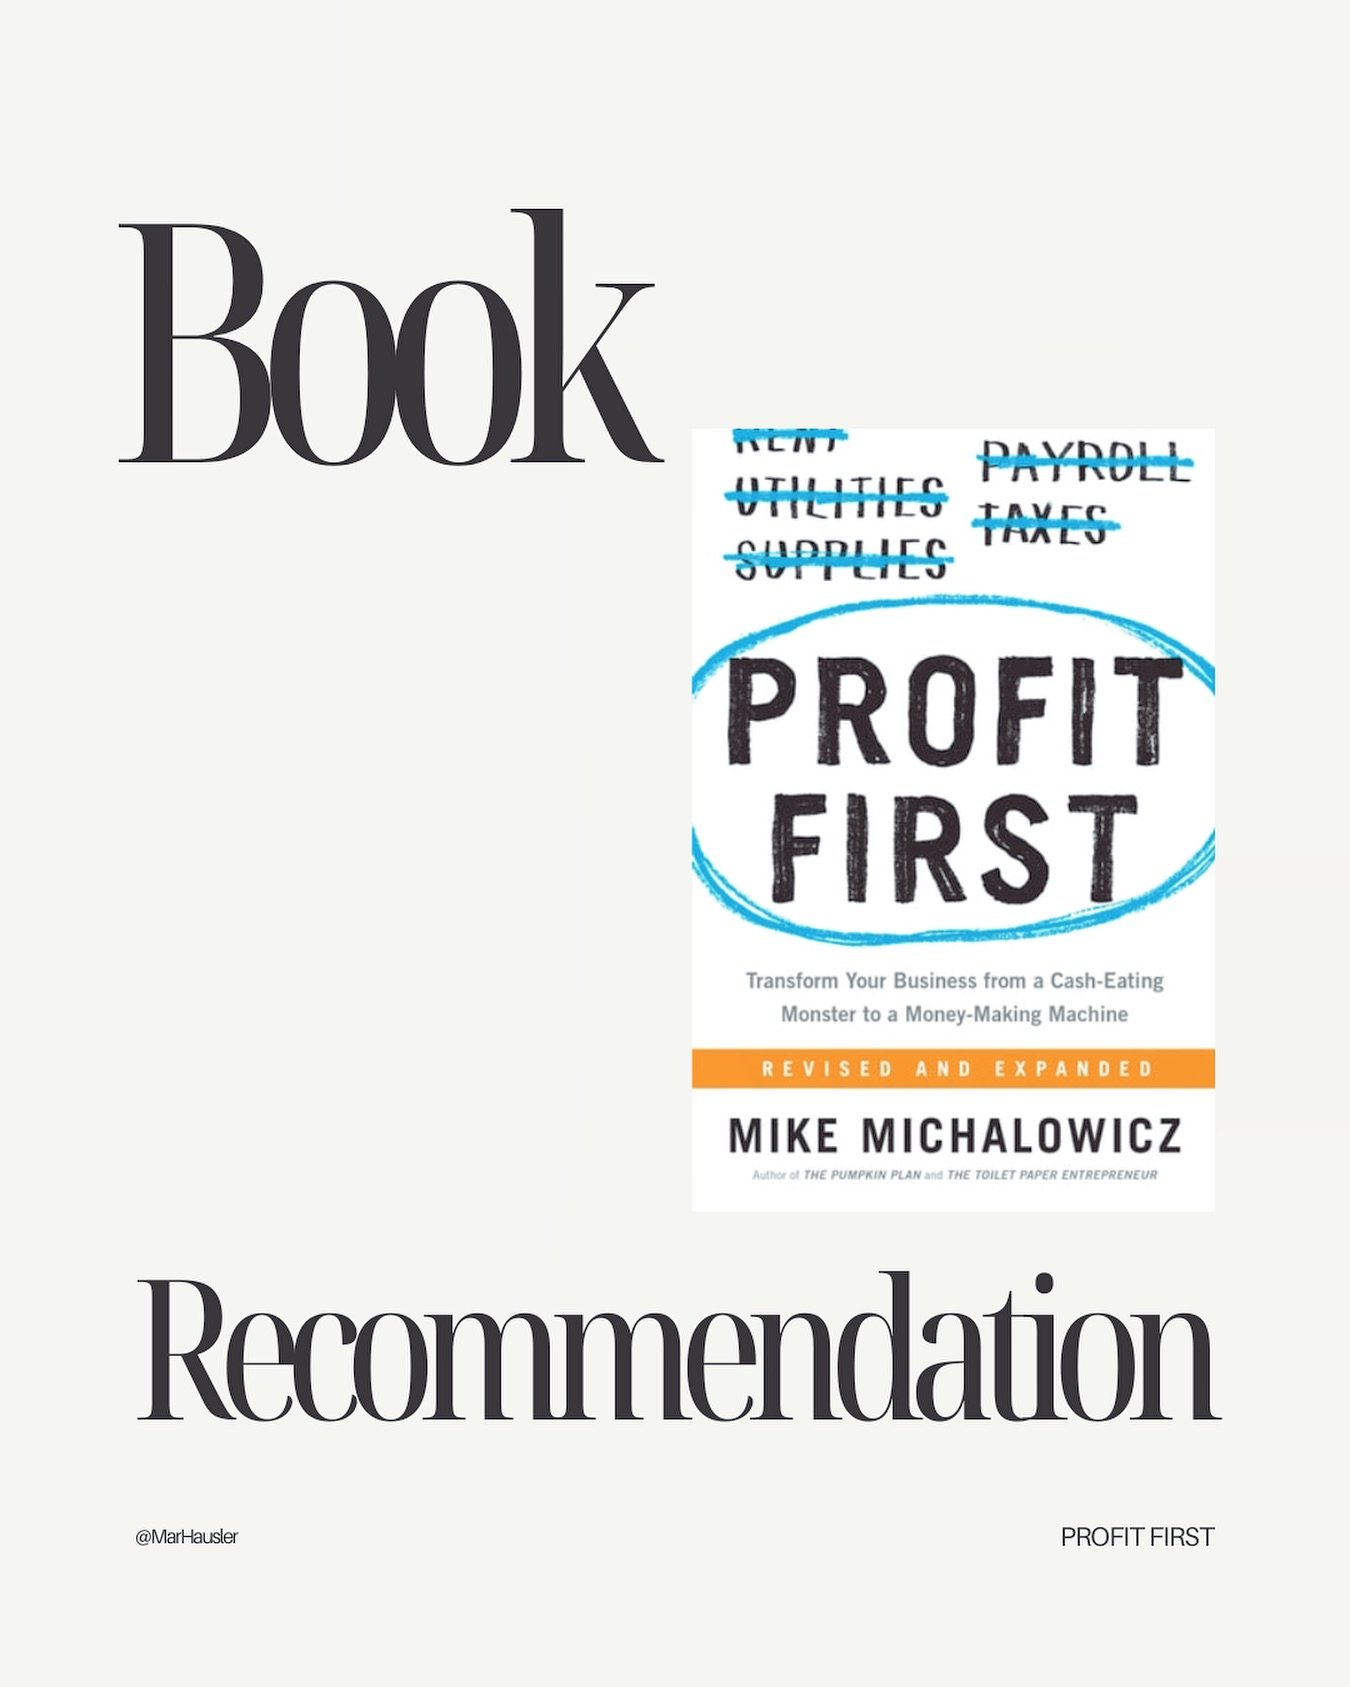 If you&rsquo;re a business owner or aspiring entrepreneur, this book is an absolute game-changer. Michalowicz&rsquo;s Profit First system completely revolutionizes the way you manage your business finances, making it easier than ever to prioritize pr